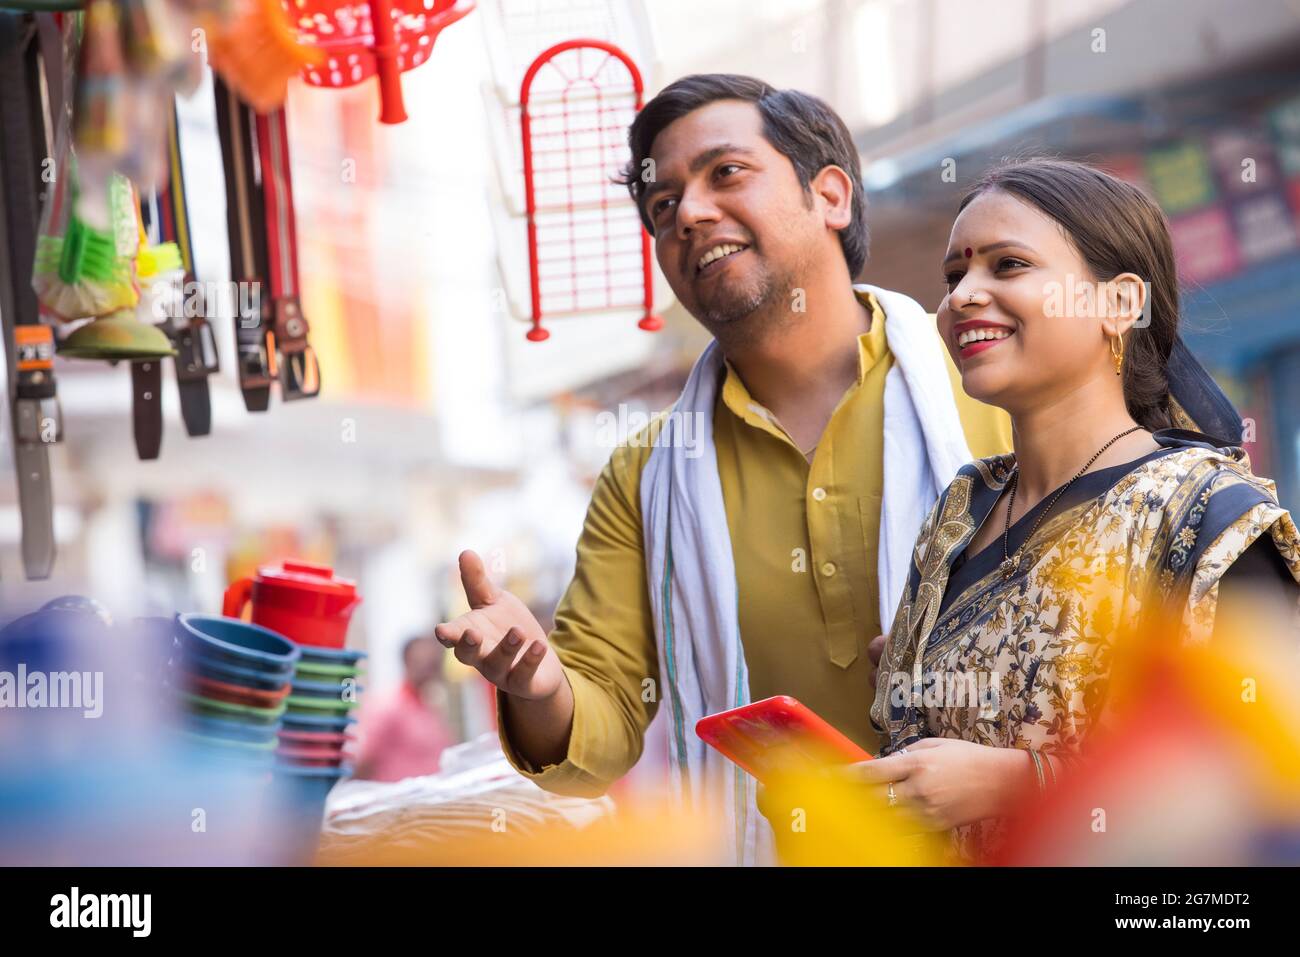 A RURAL MAN AND WIFE BUYING HOUSEHOLD ITEMS TOGETHER Stock Photo